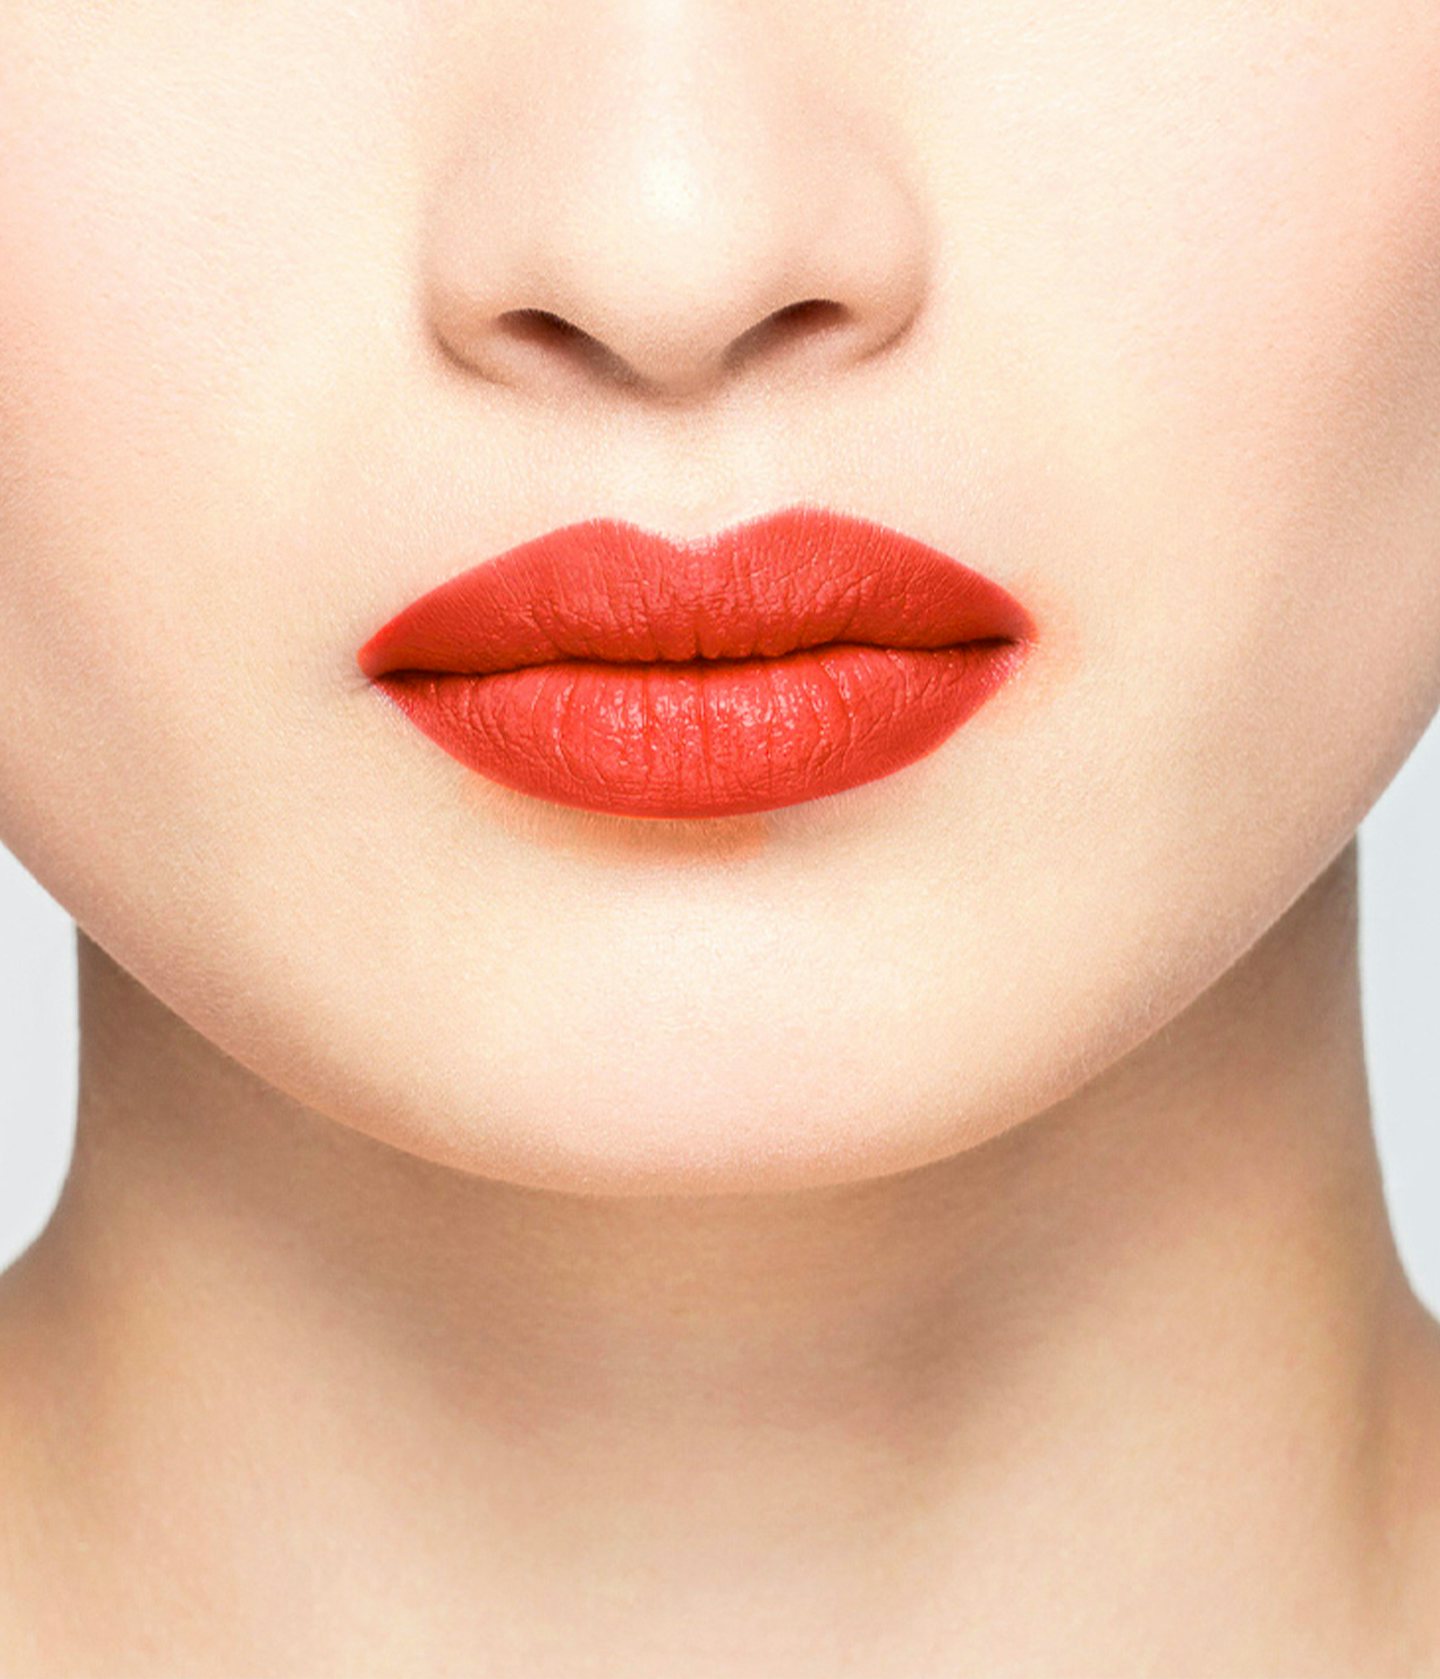 La bouche rouge Le Rouge Elsa lipstick shade on the lips of an Asian model